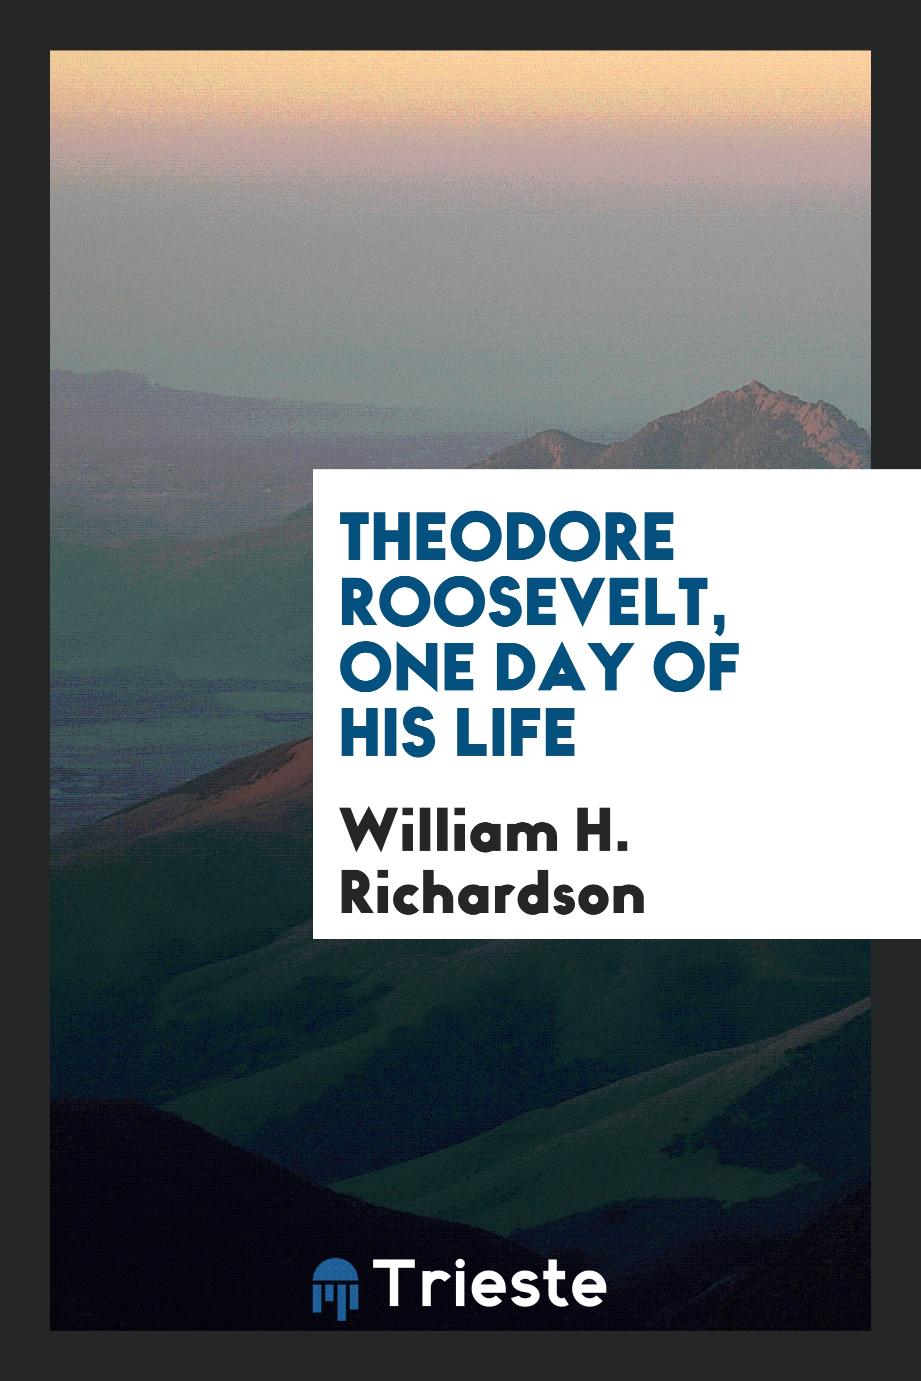 Theodore Roosevelt, one day of his life